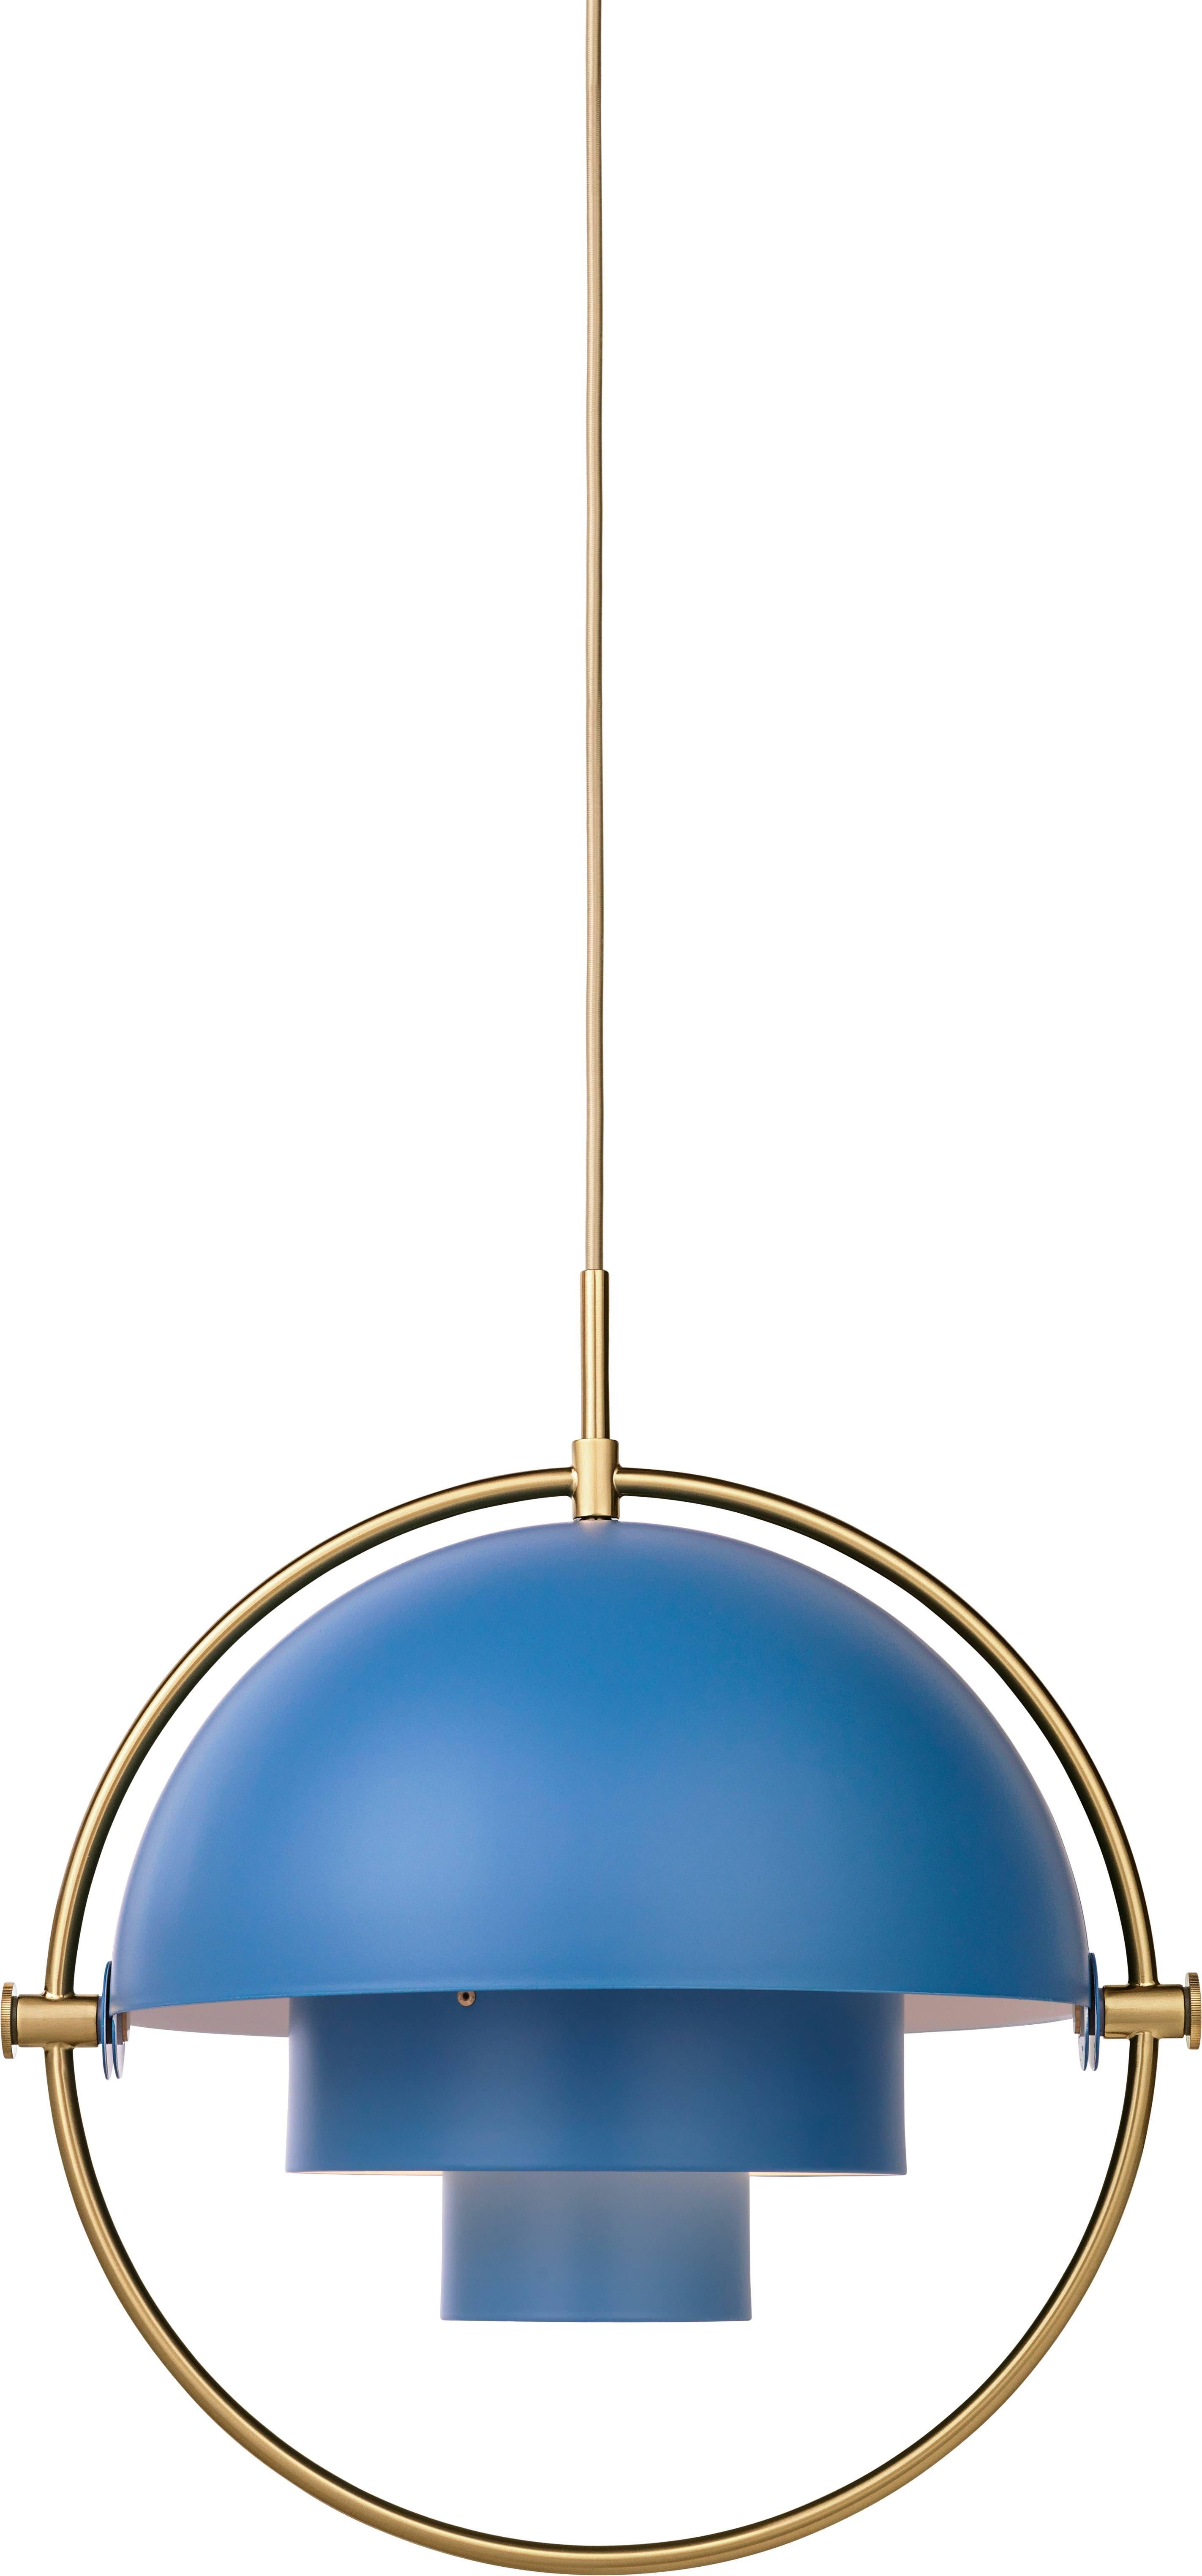 Brass multi-light pendant, Louis Weisdorf.

Dimensions: 36 x 36 x 36 cm
Material: Brass
Designer: Louis Weisdorf
Produced by Gubi in Denmark

The Multi-Lite pendant embraces the golden era of Danish design with its characteristic shape of two